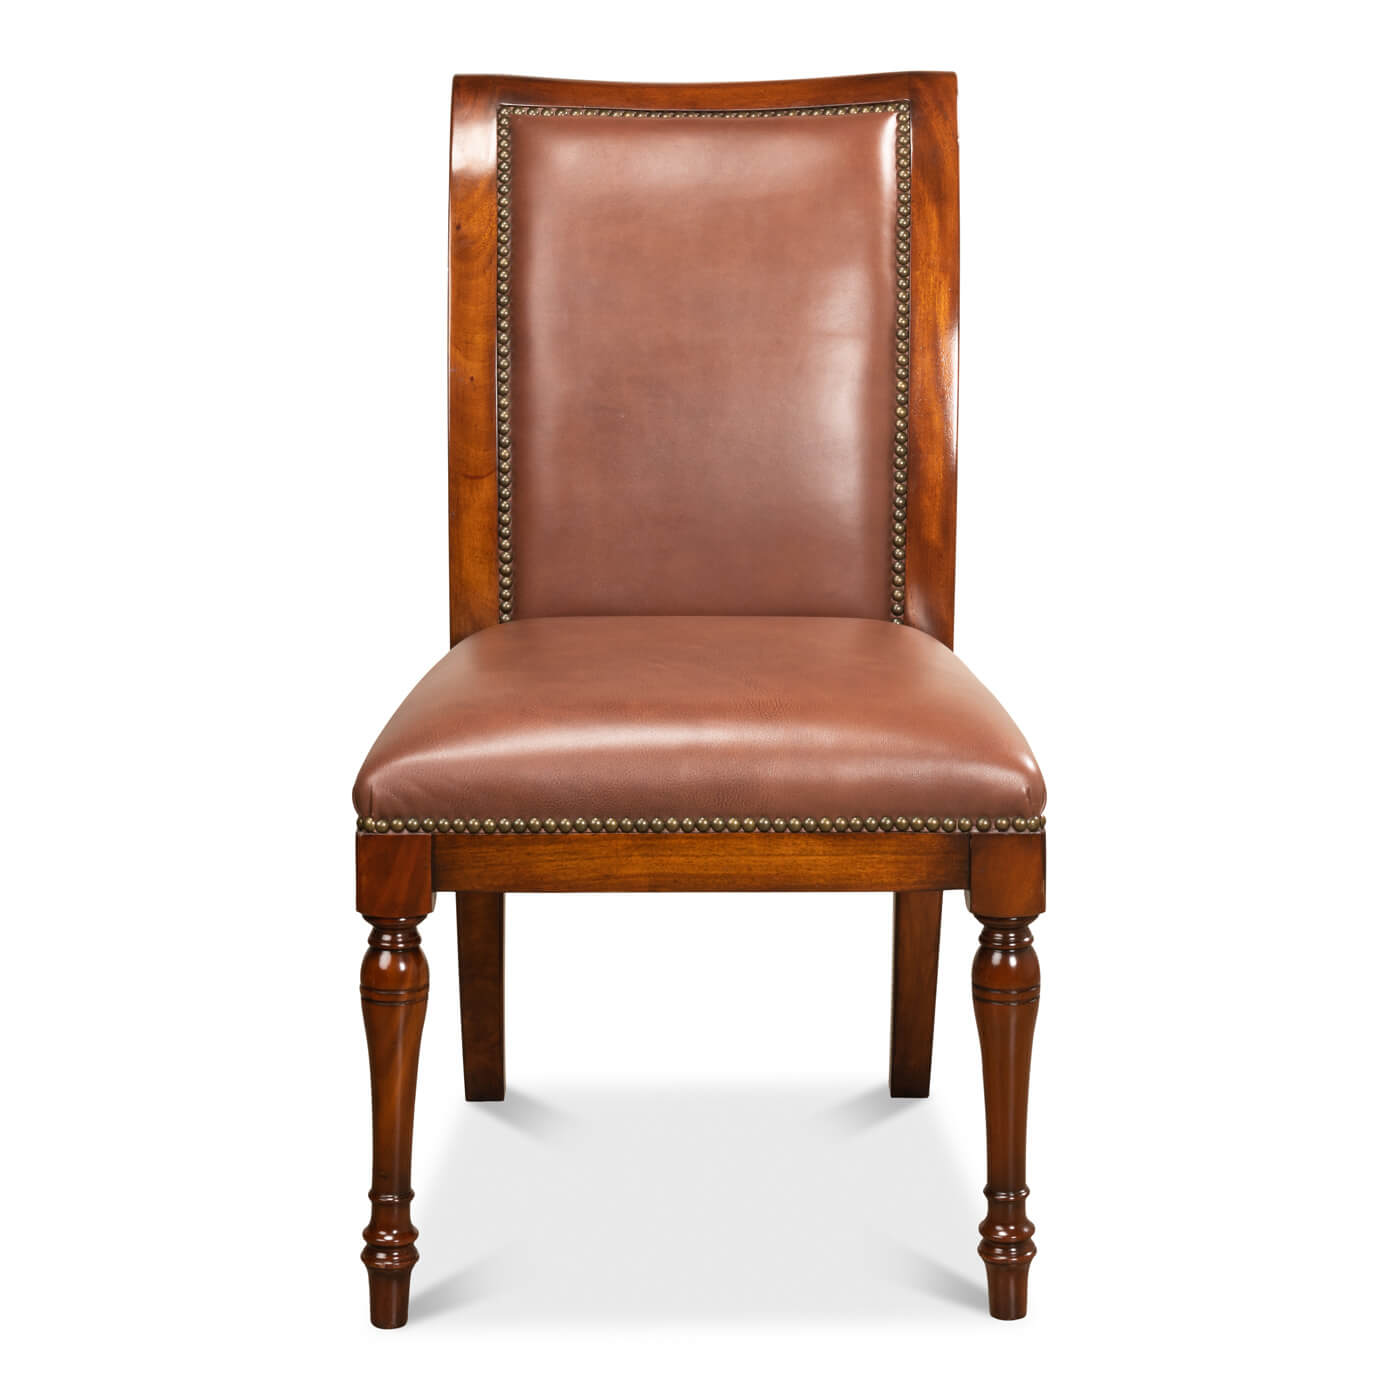 Directoire Style Leather Dining Chair - English Georgian America